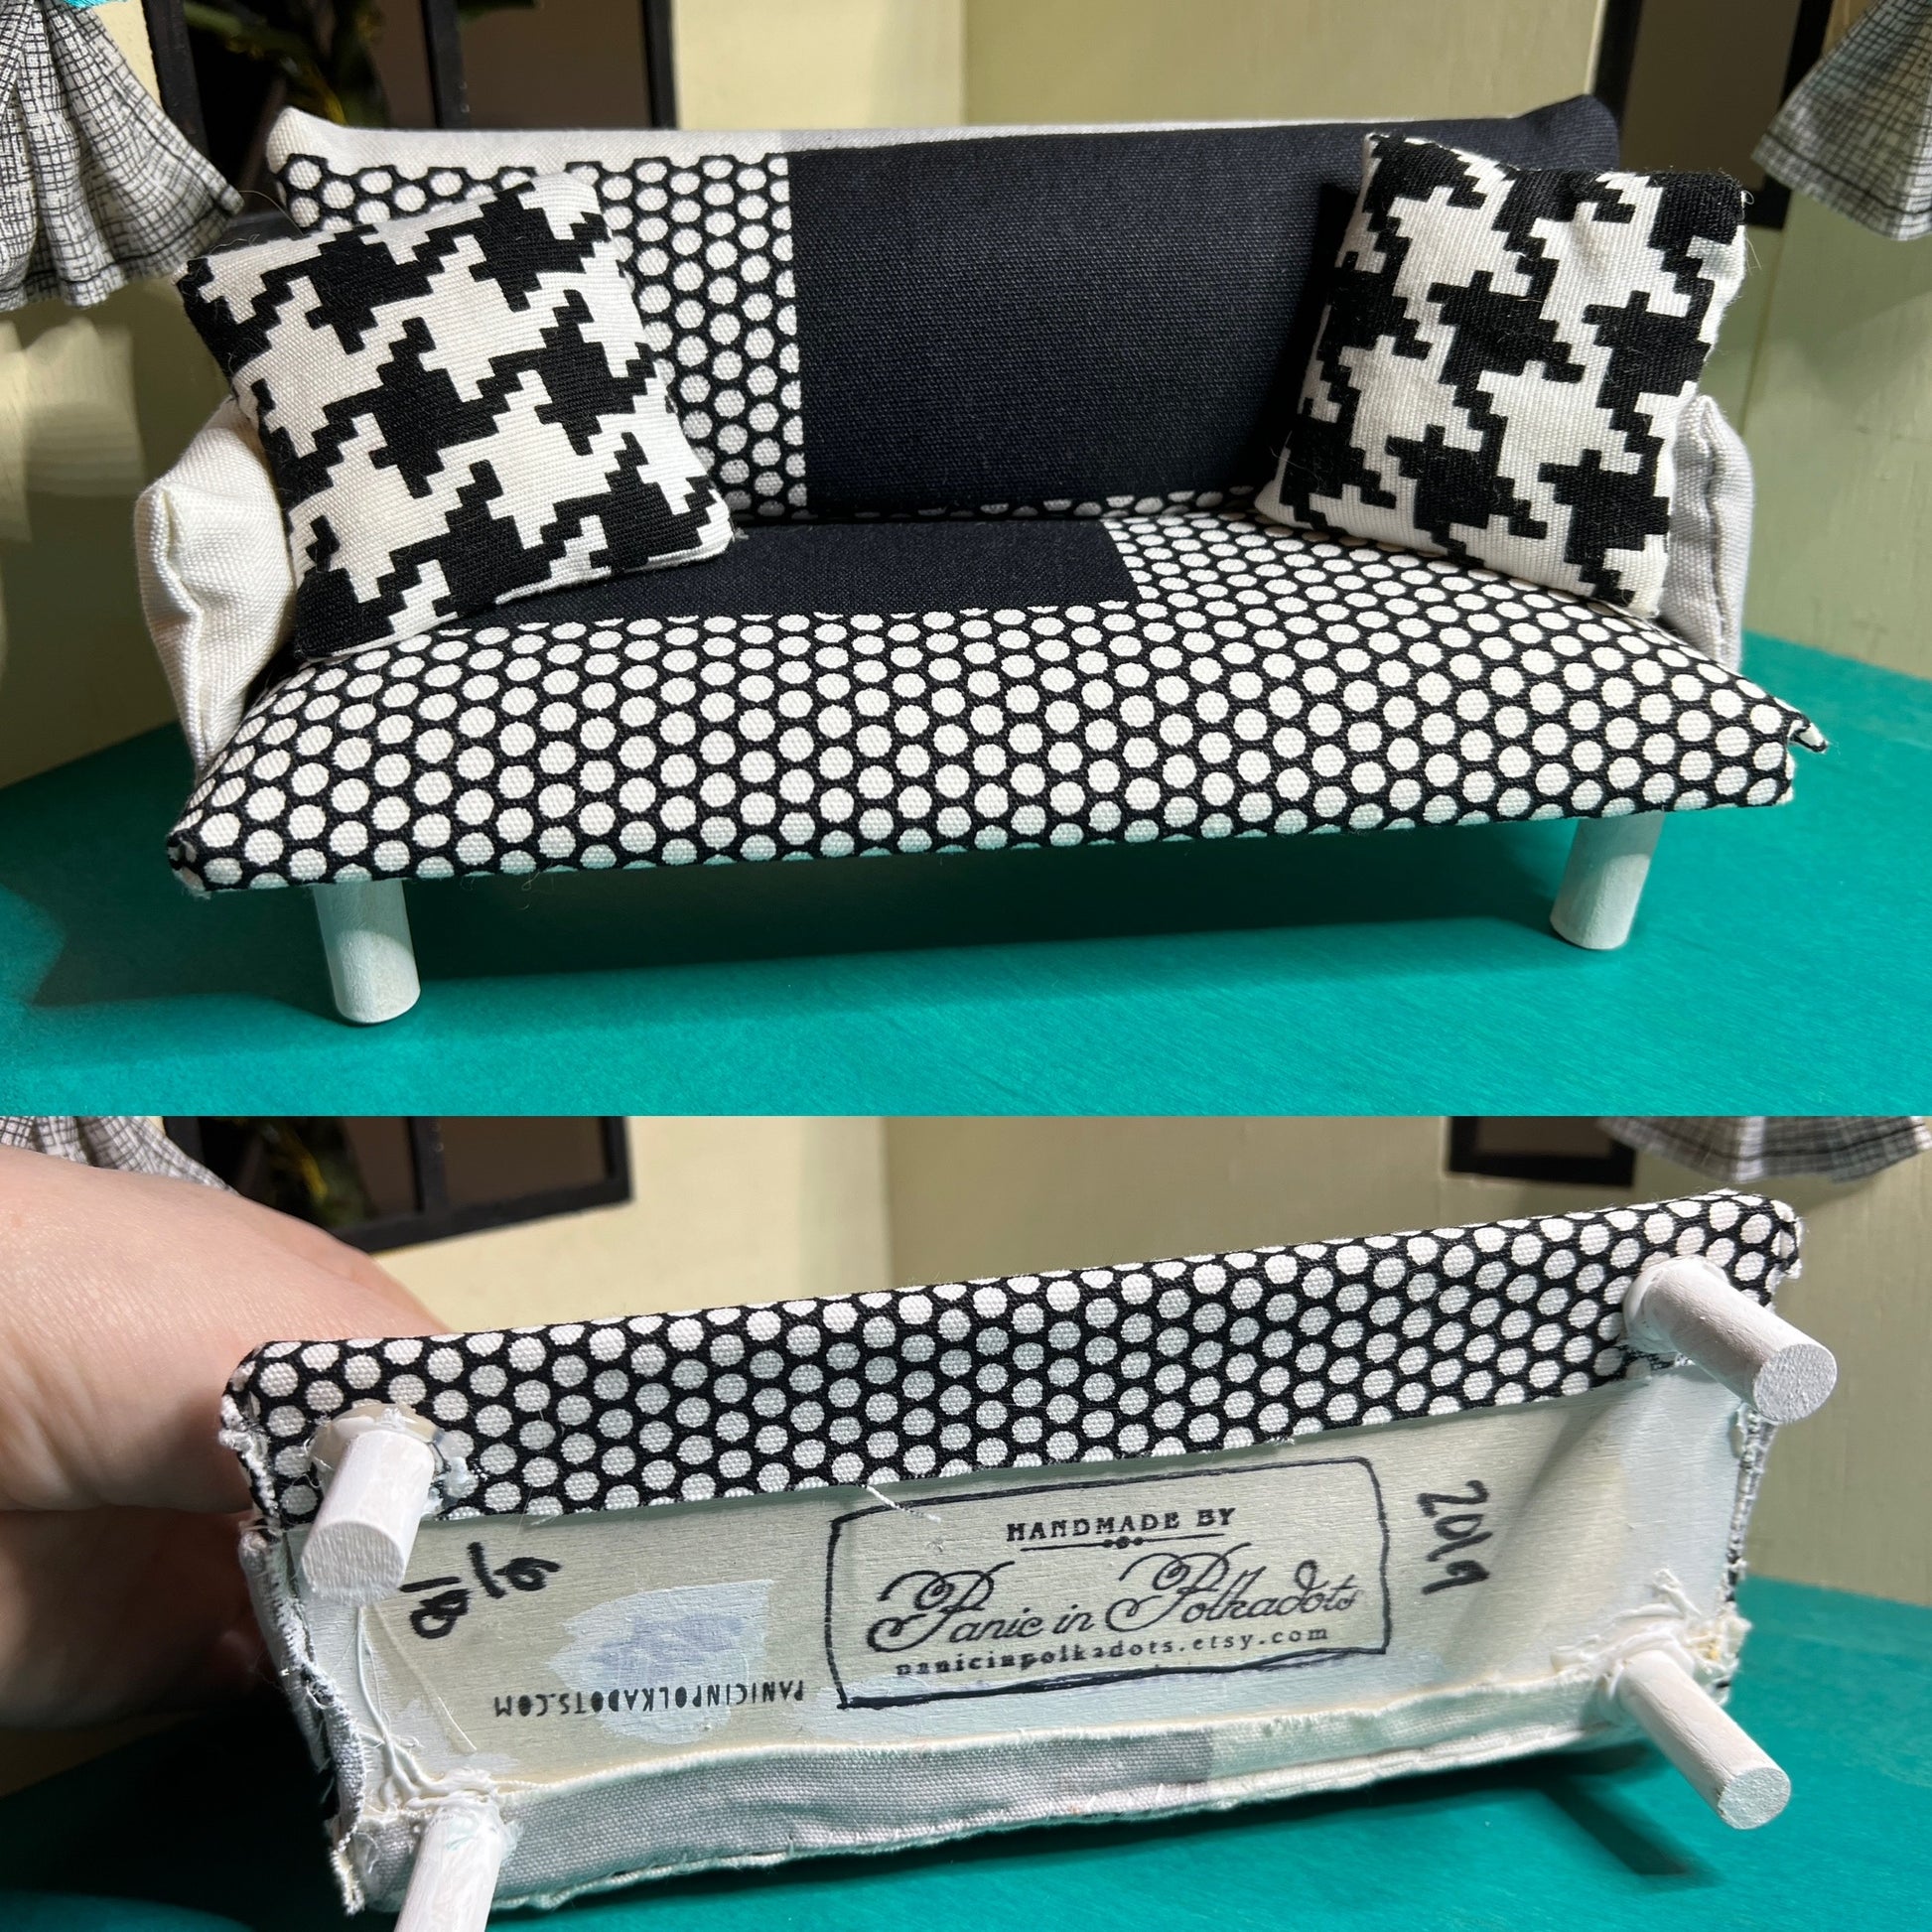 a miniature dollhouse couch, top picture is front view, bottom picture shows underside of couch with item number, year created, and "Panic in Polkadots" stamp on underside